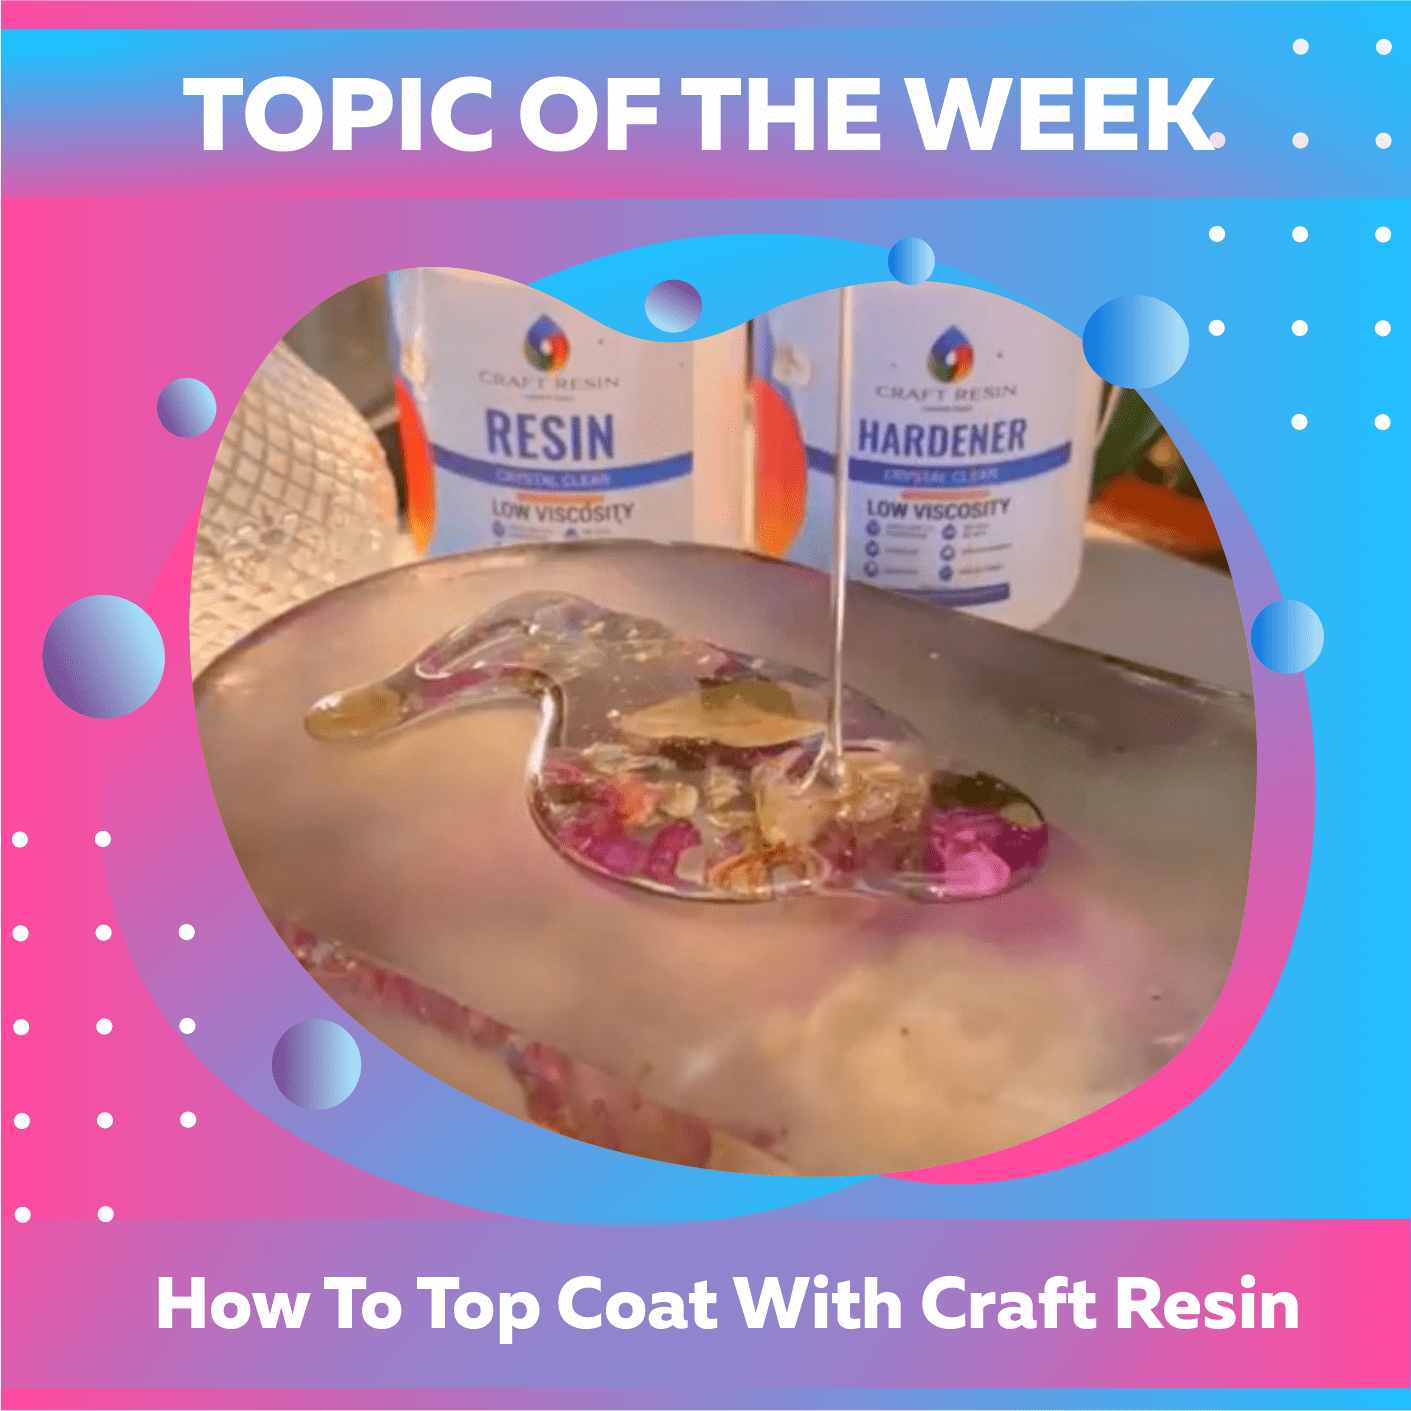 How To Top Coat With Craft Resin